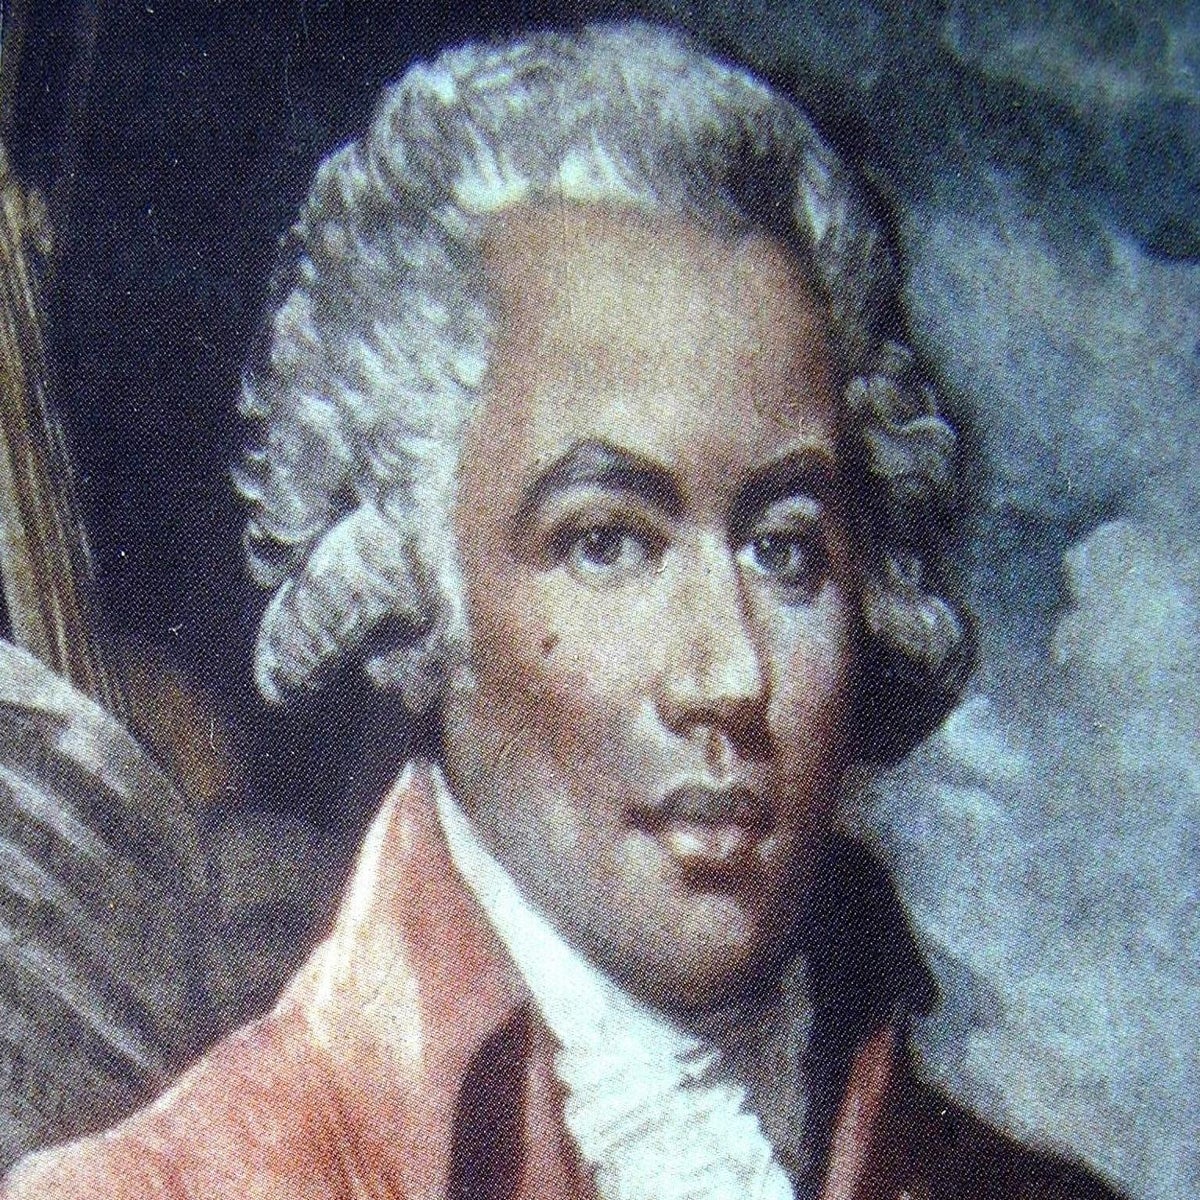 His Name Is Joseph Boulogne, Not 'Black Mozart' - The New York Times